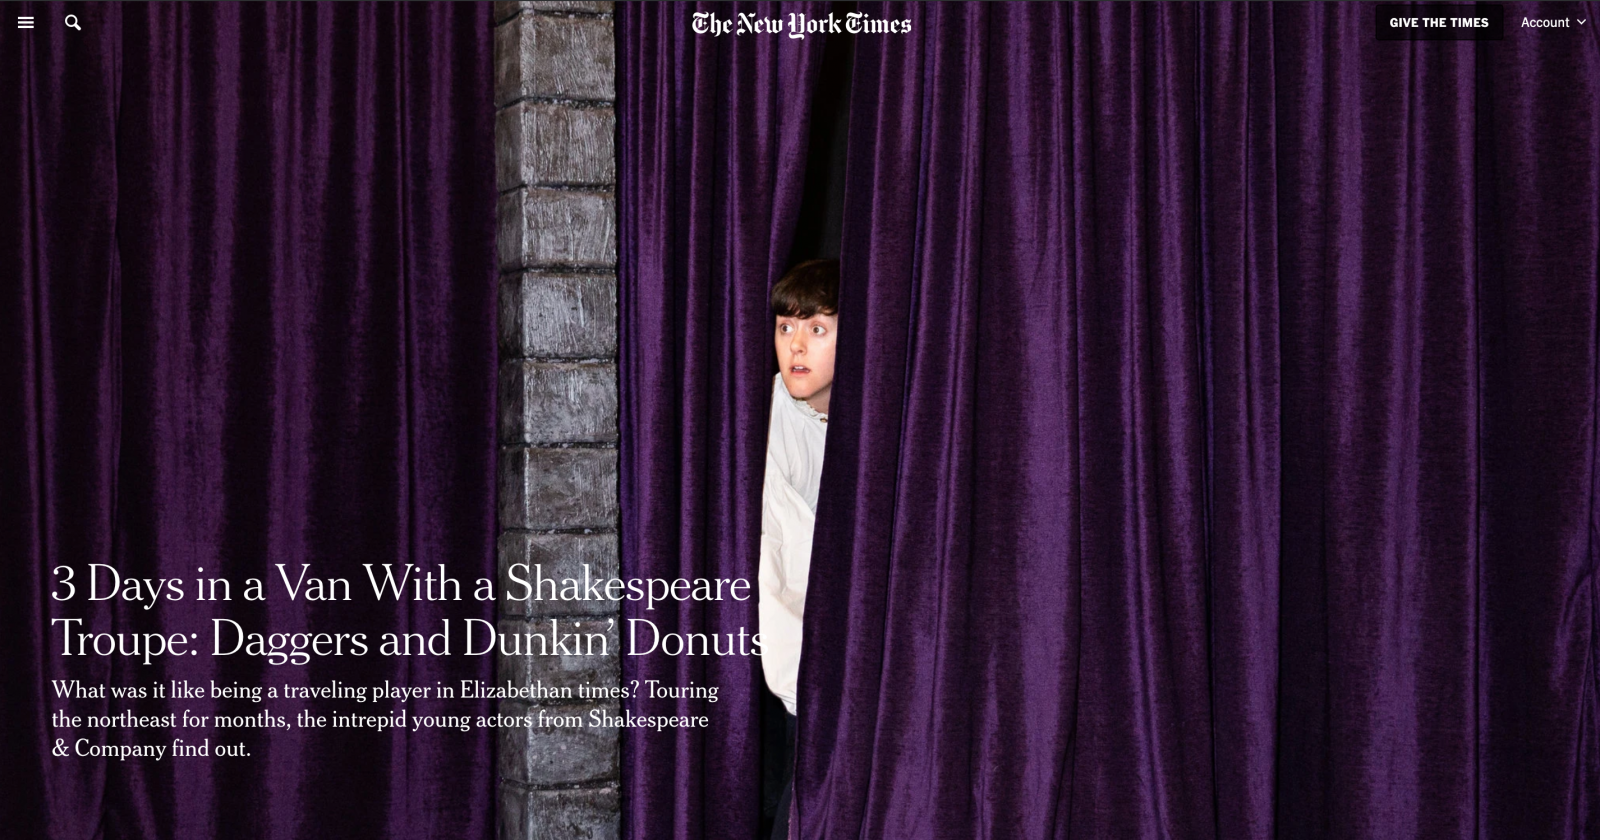 On tour with Shakespearean actors, for the New York Times 